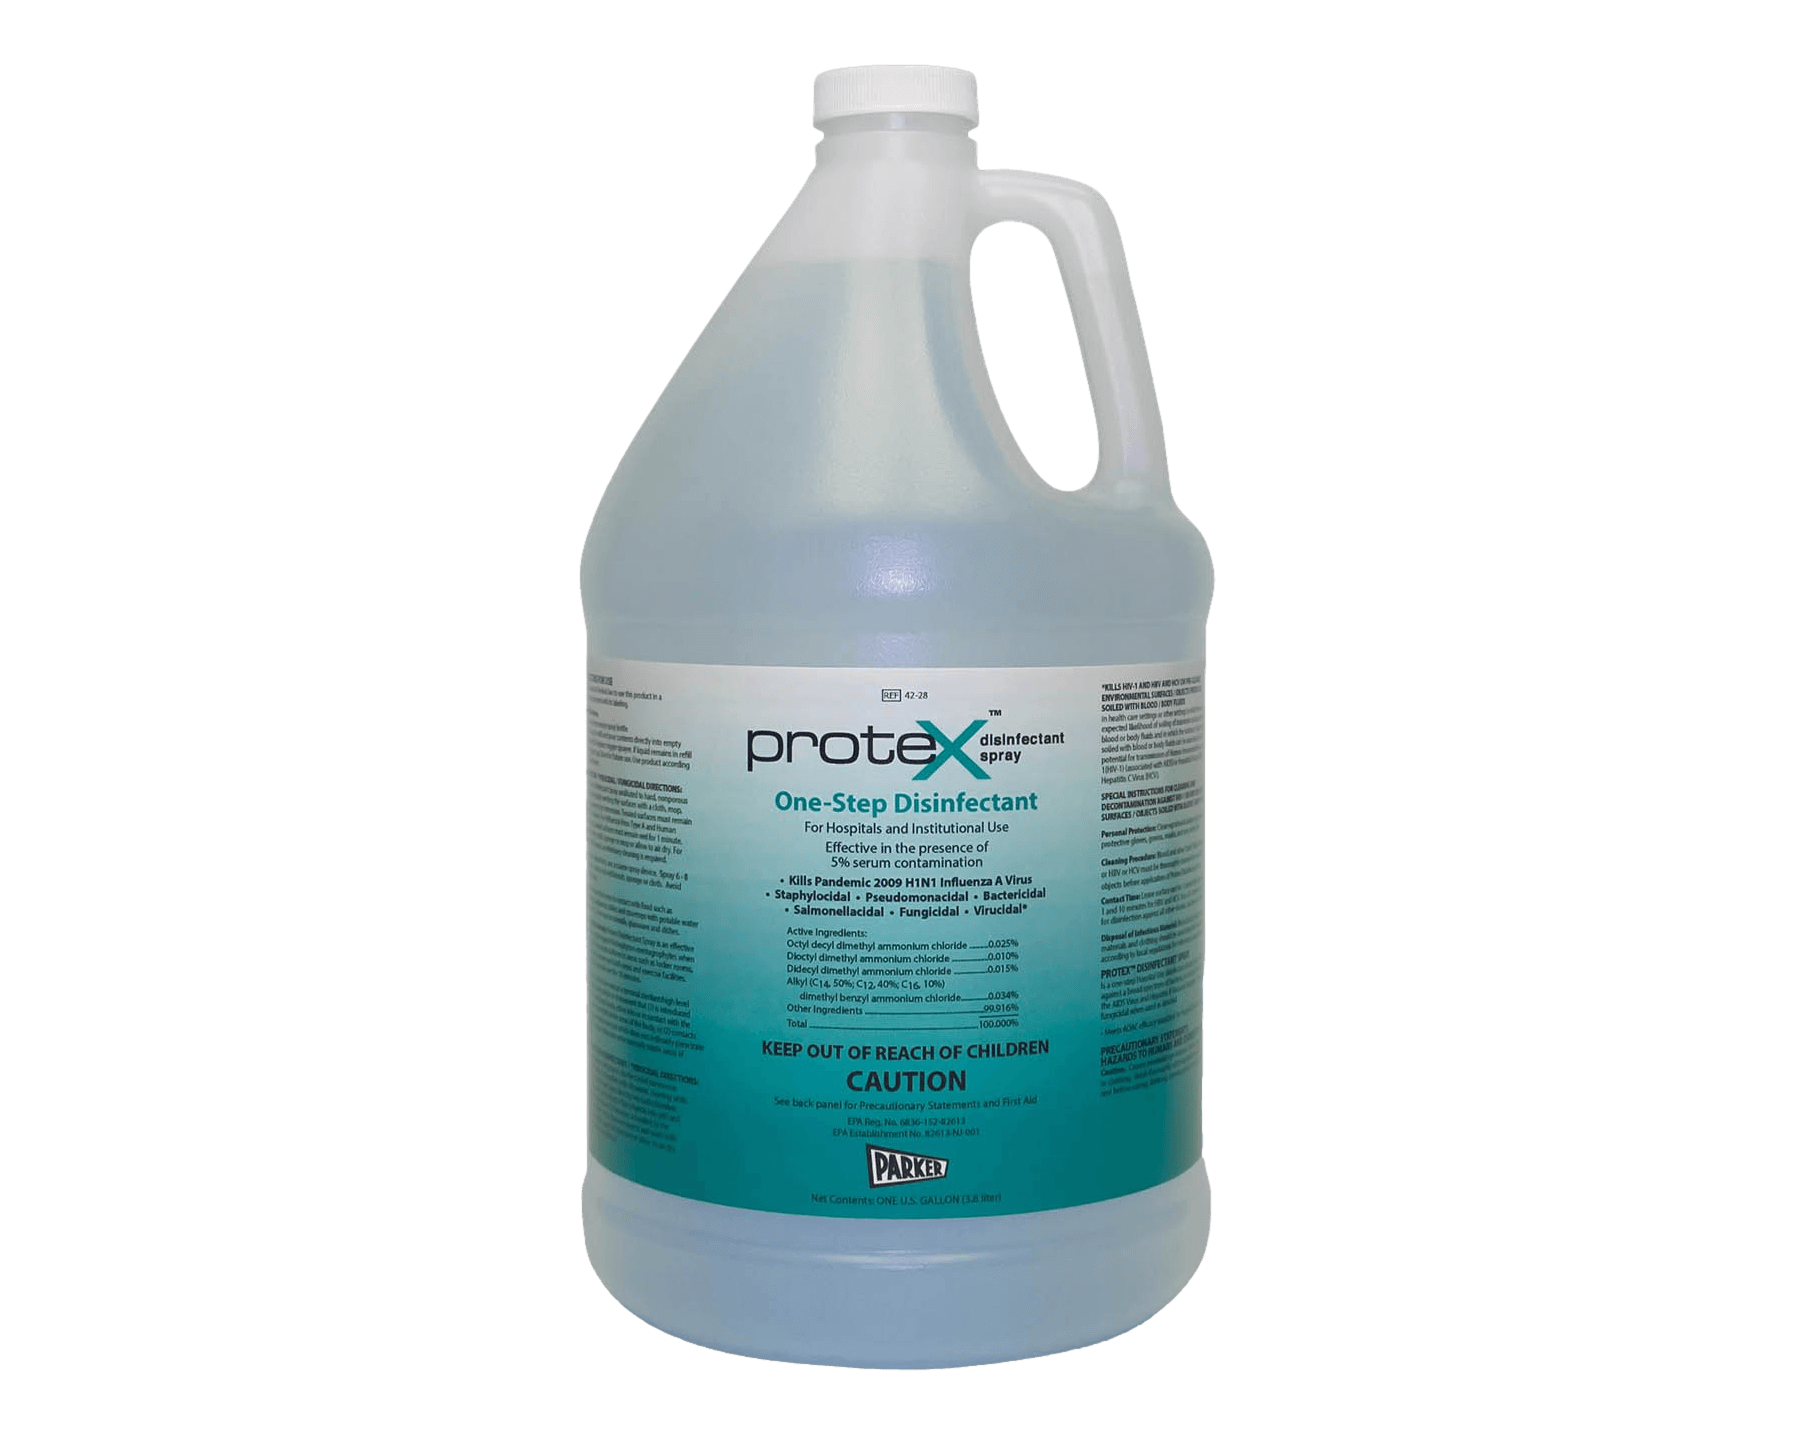 Parker Protex Disinfectant Spray 1 Gallon